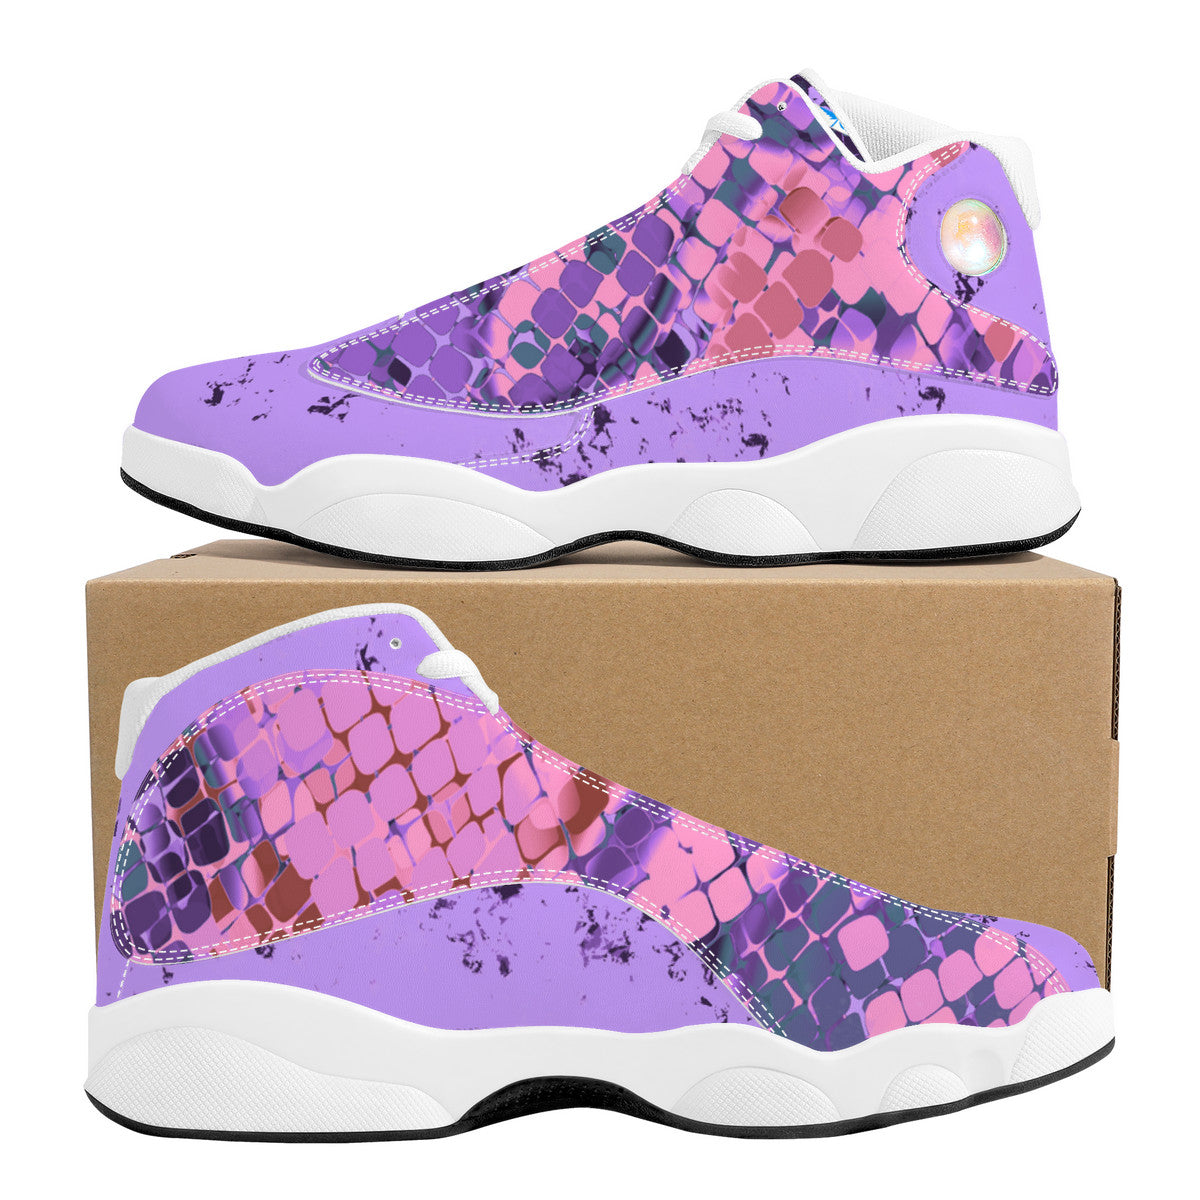 RVT Basketball Shoes - Purple Scales